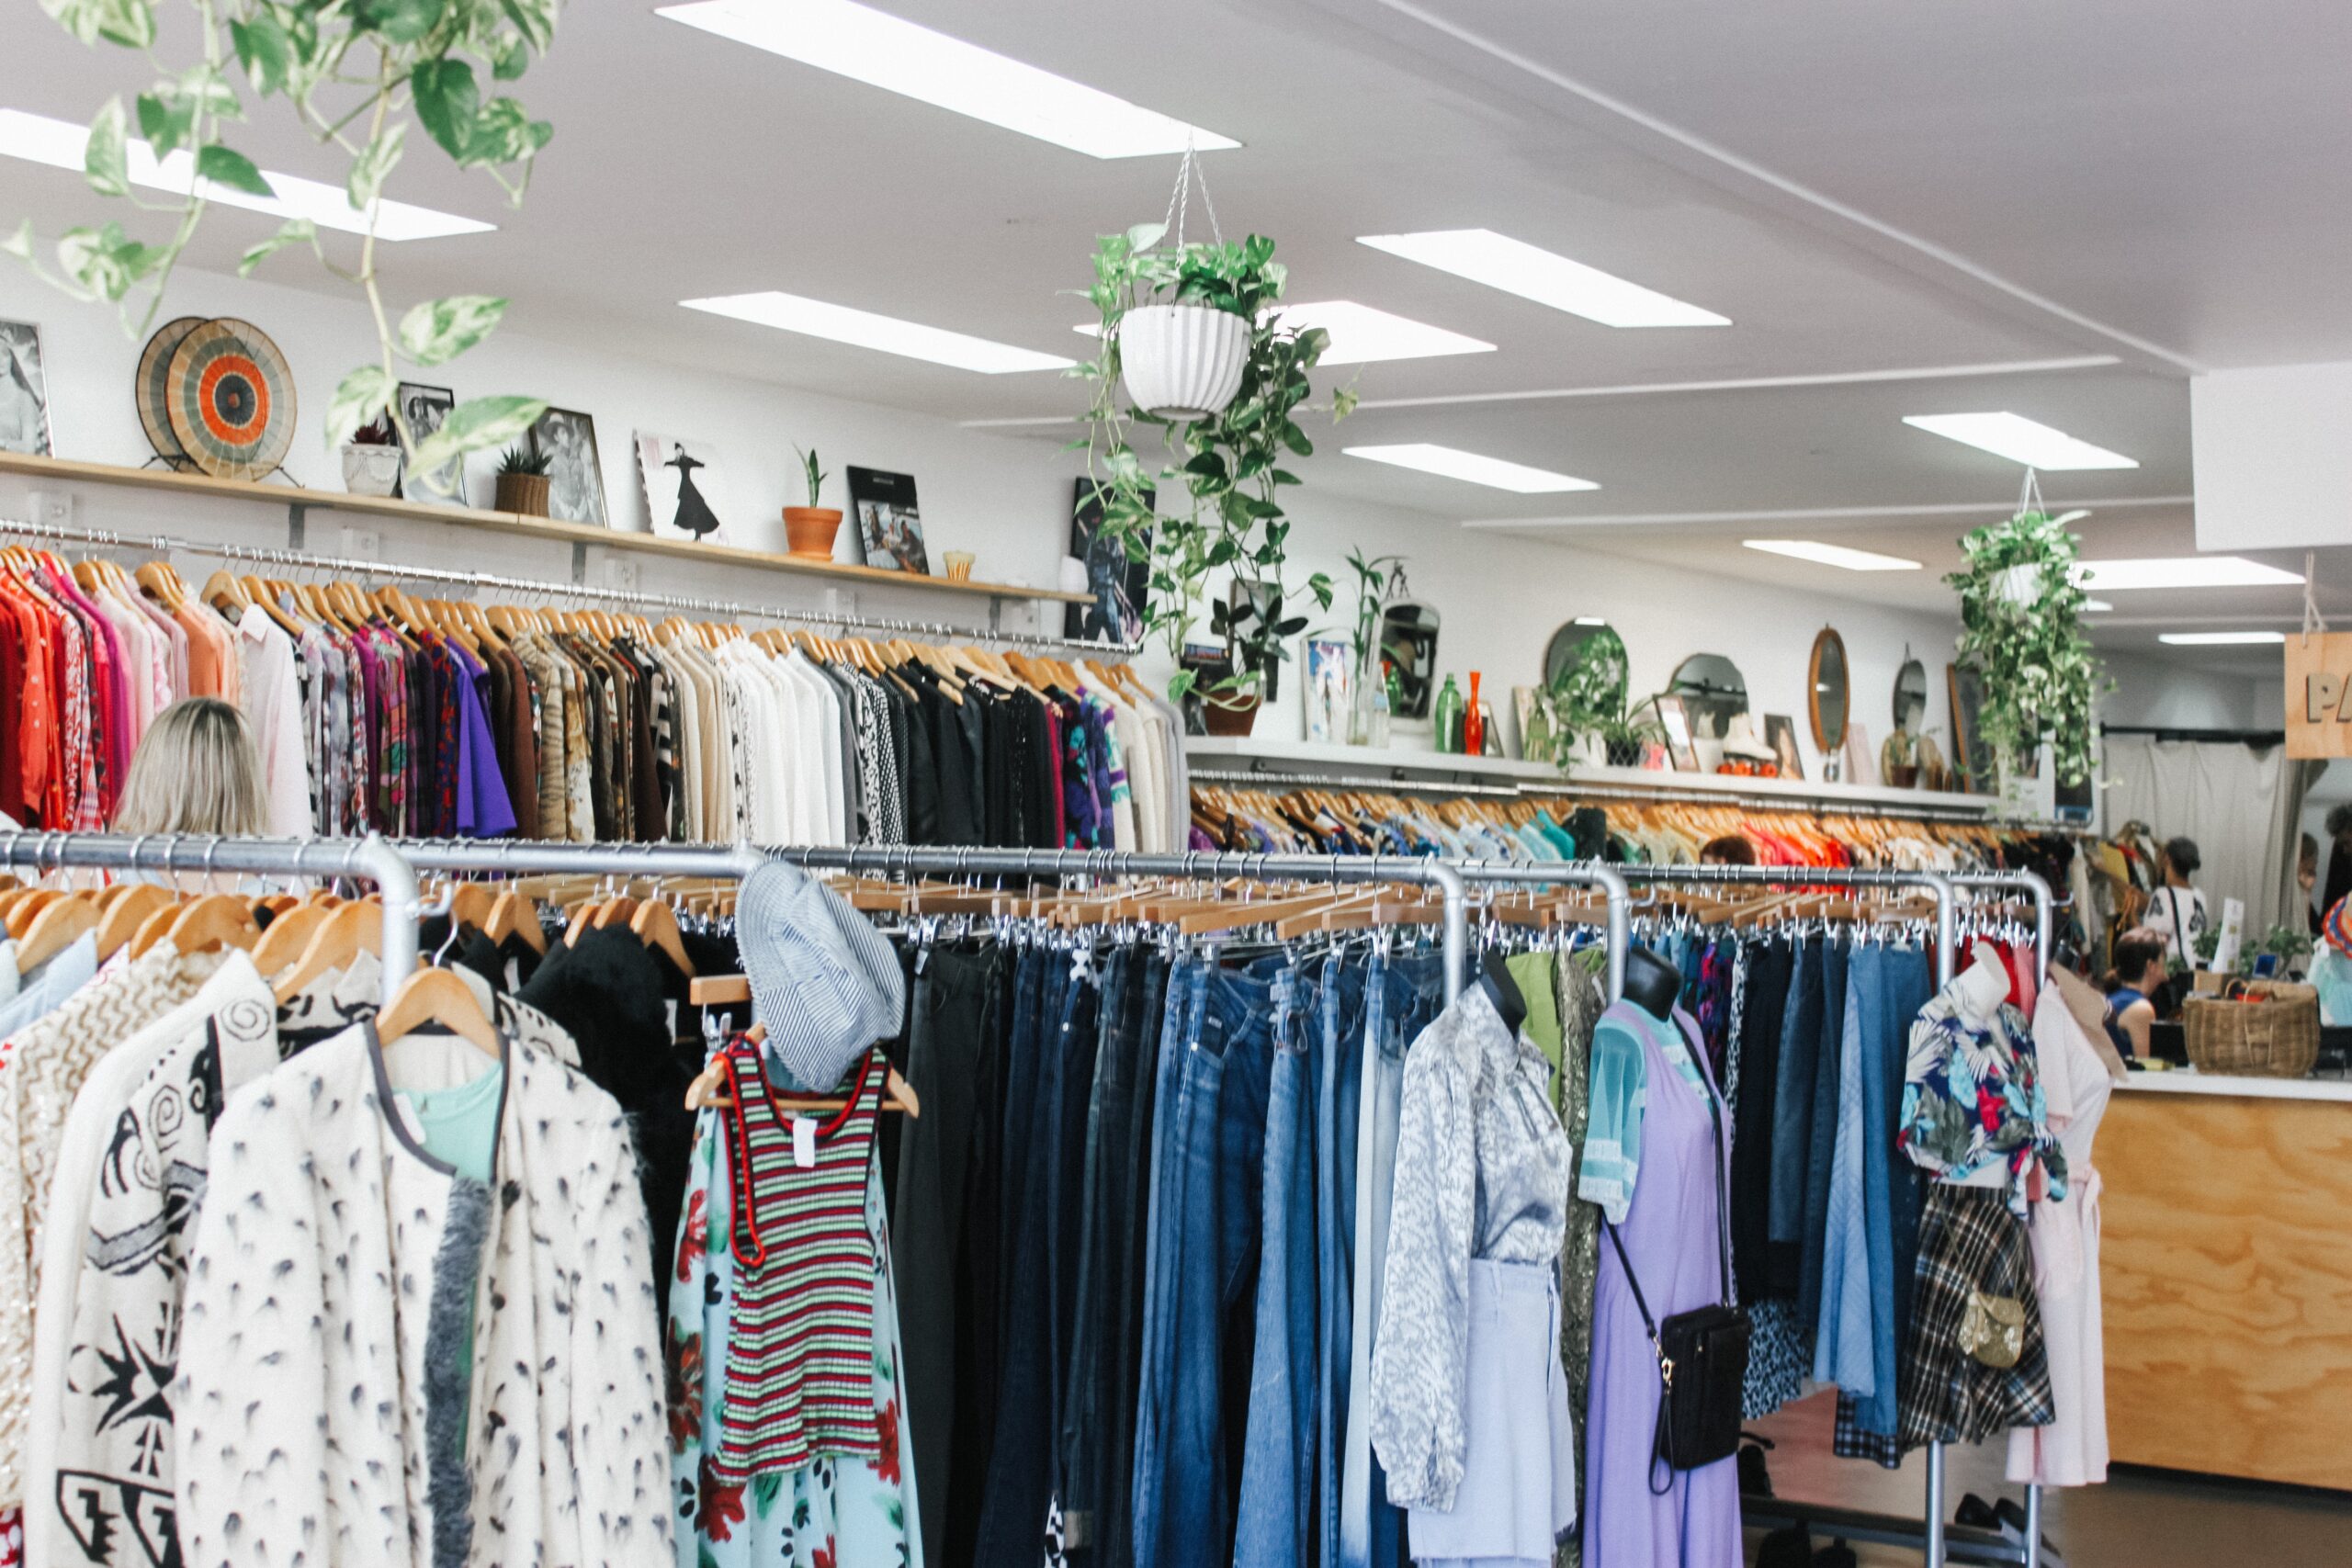 Best Charity Shops in Brighton - Clothes rail in charity shop in Brighton